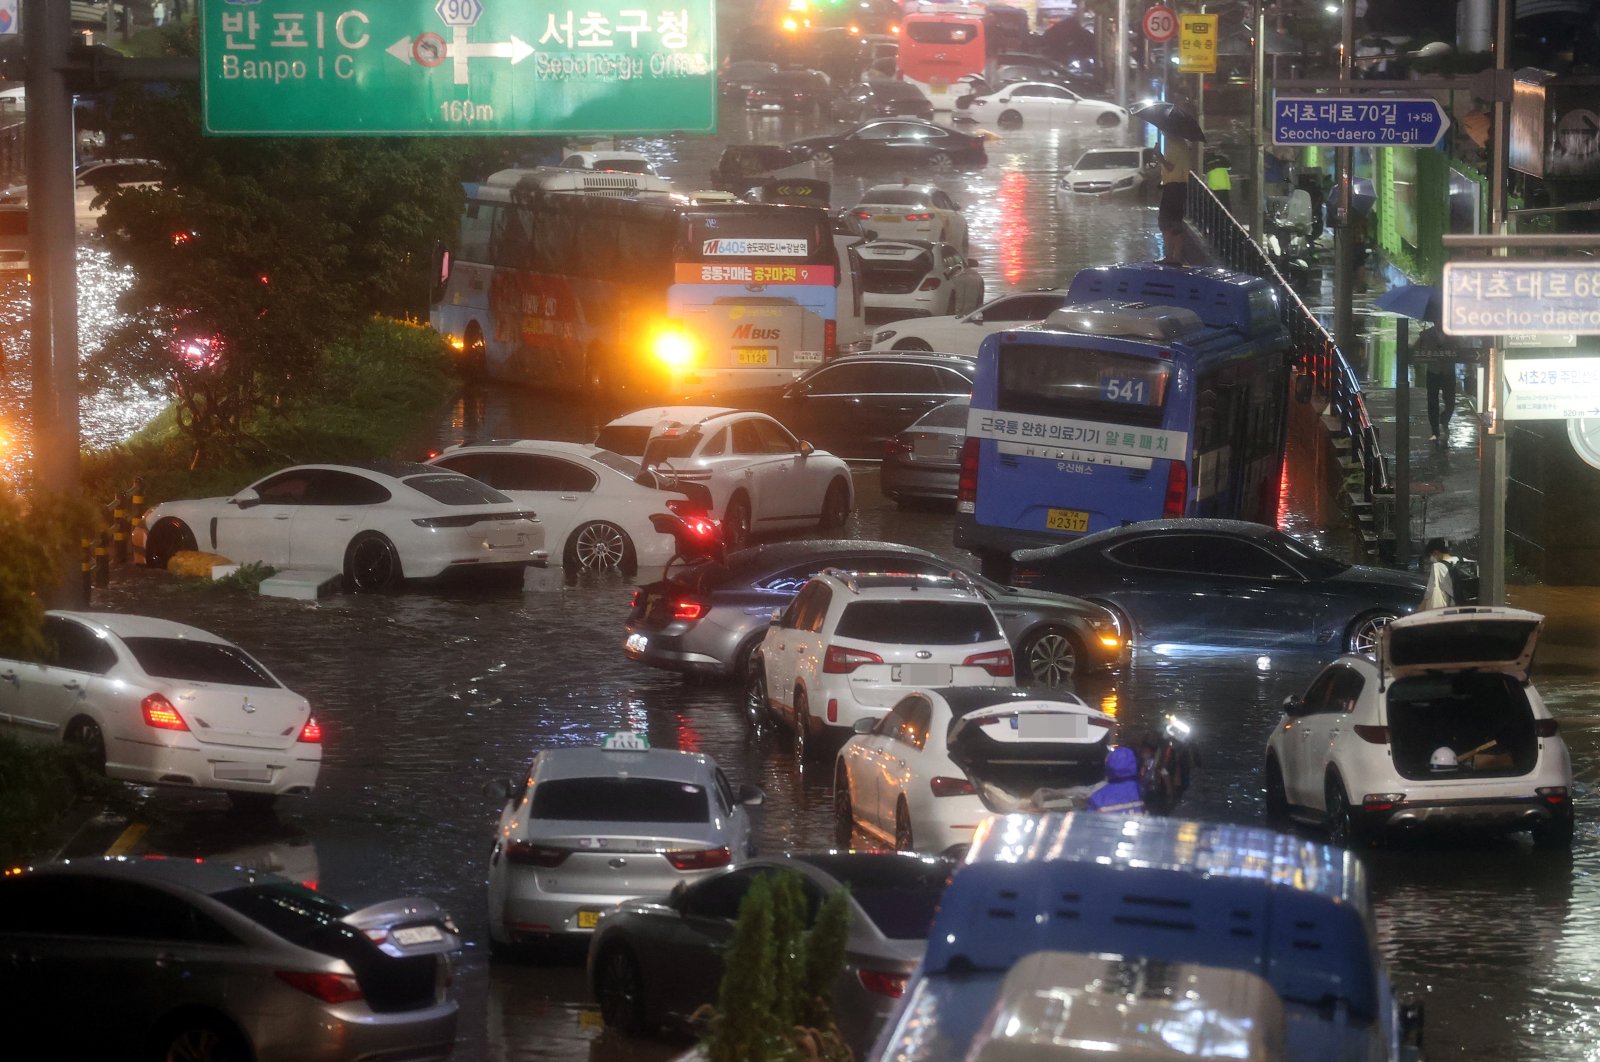 Abandoned vehicles fill the road in flooded area during heavy rain in Seoul, South Korea, Aug. 8, 2022. (Yonhap via Reuters)